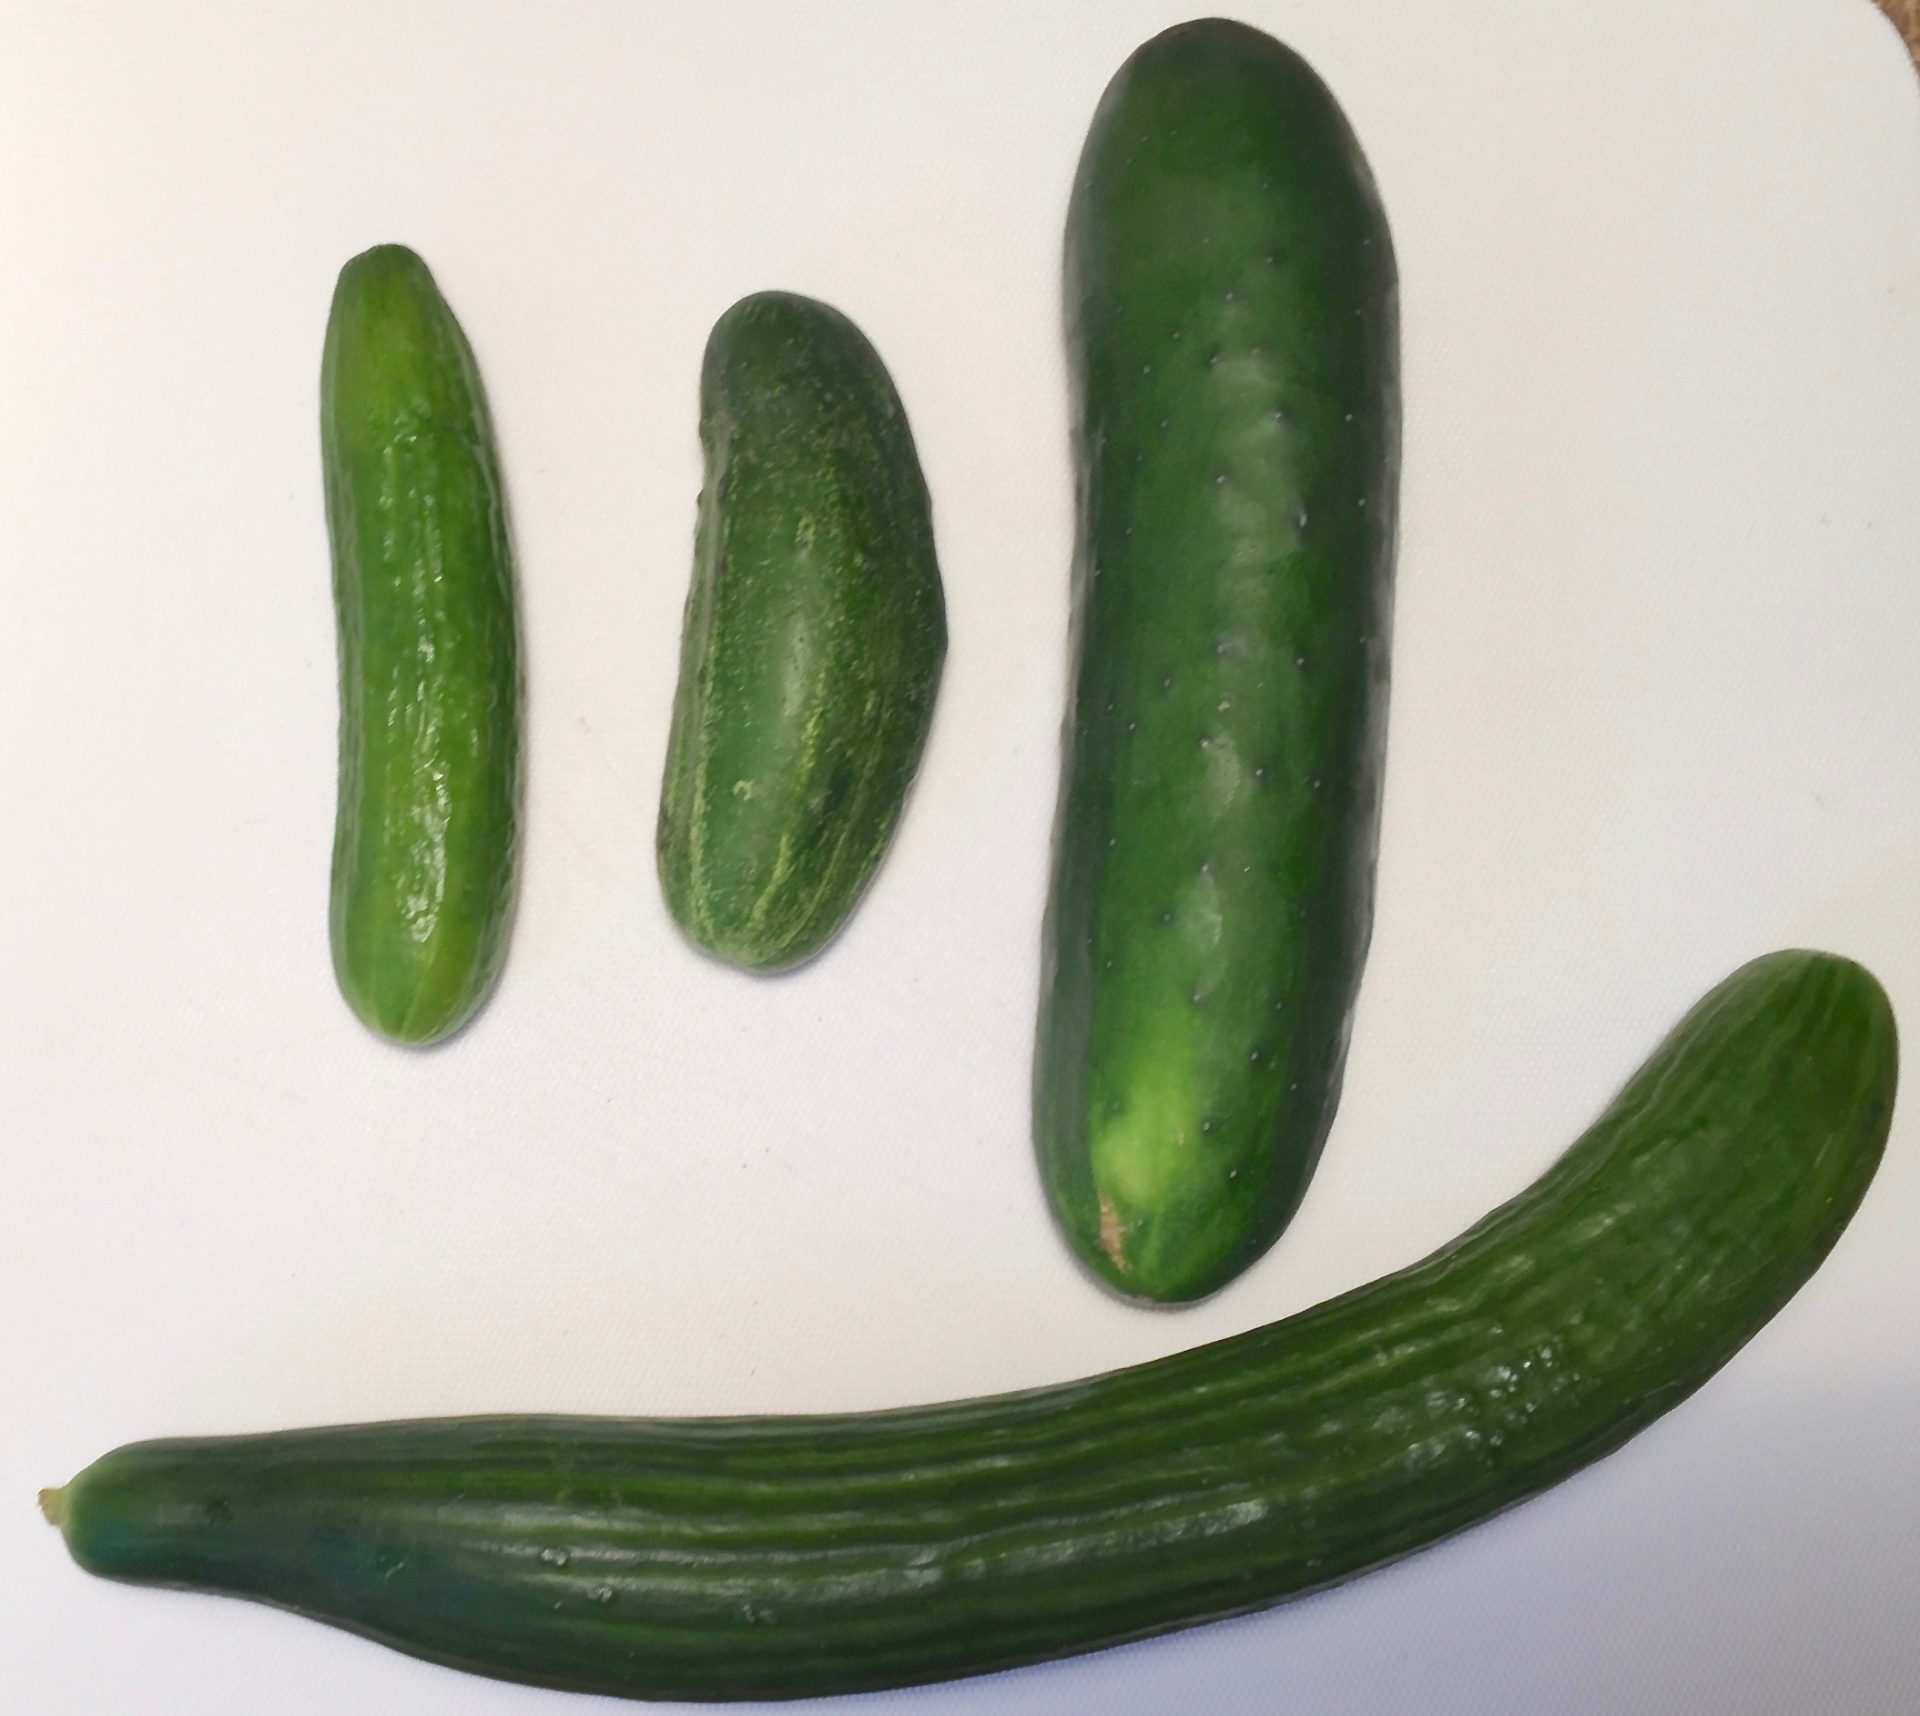 Four kinds of cucumbers